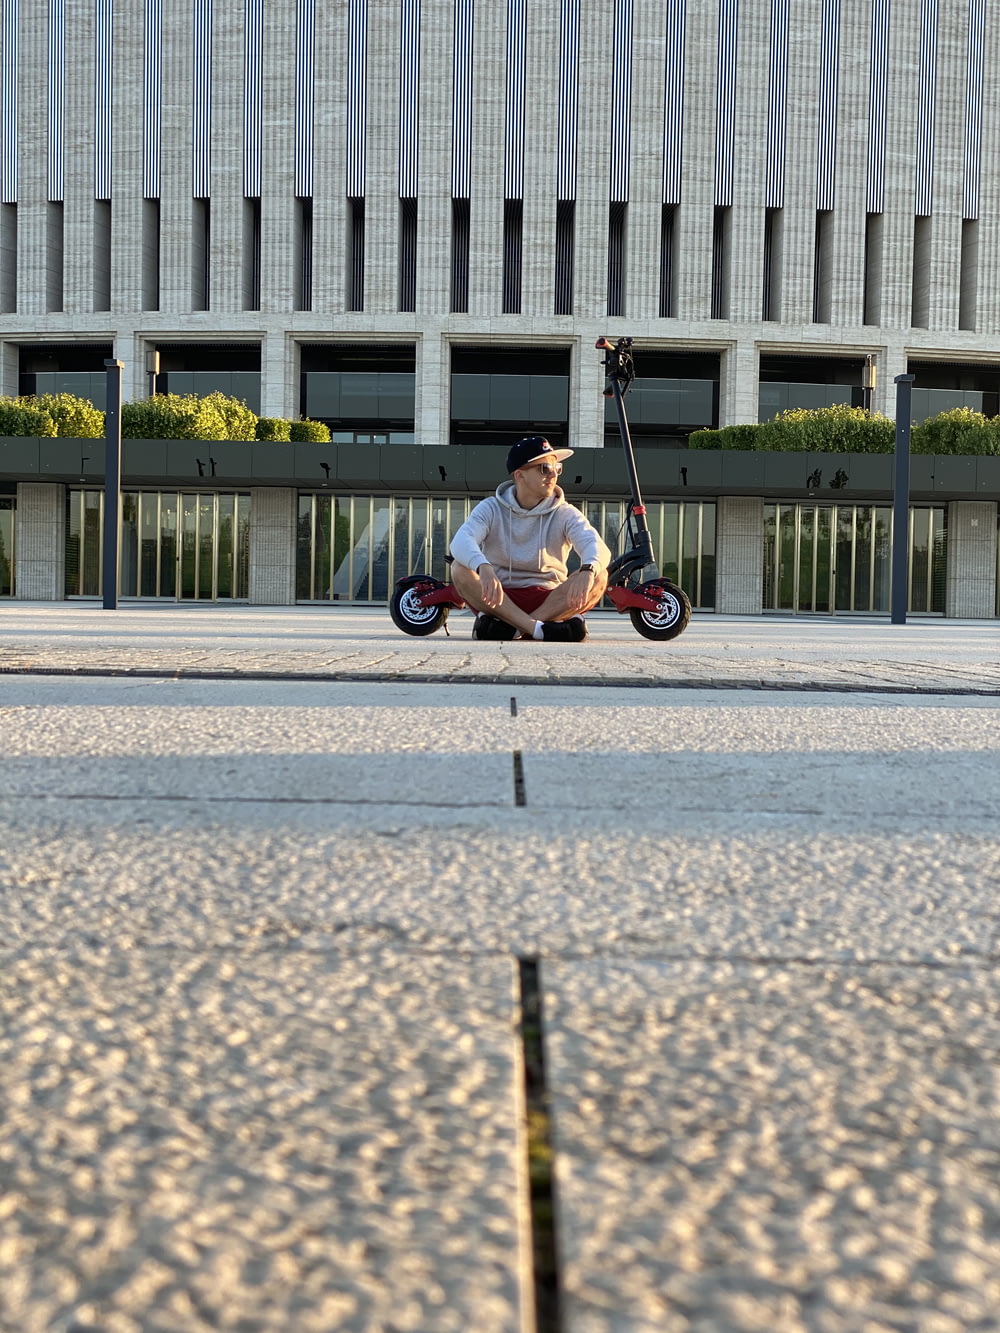 man in black shirt riding on black and white bicycle on gray concrete road during daytime